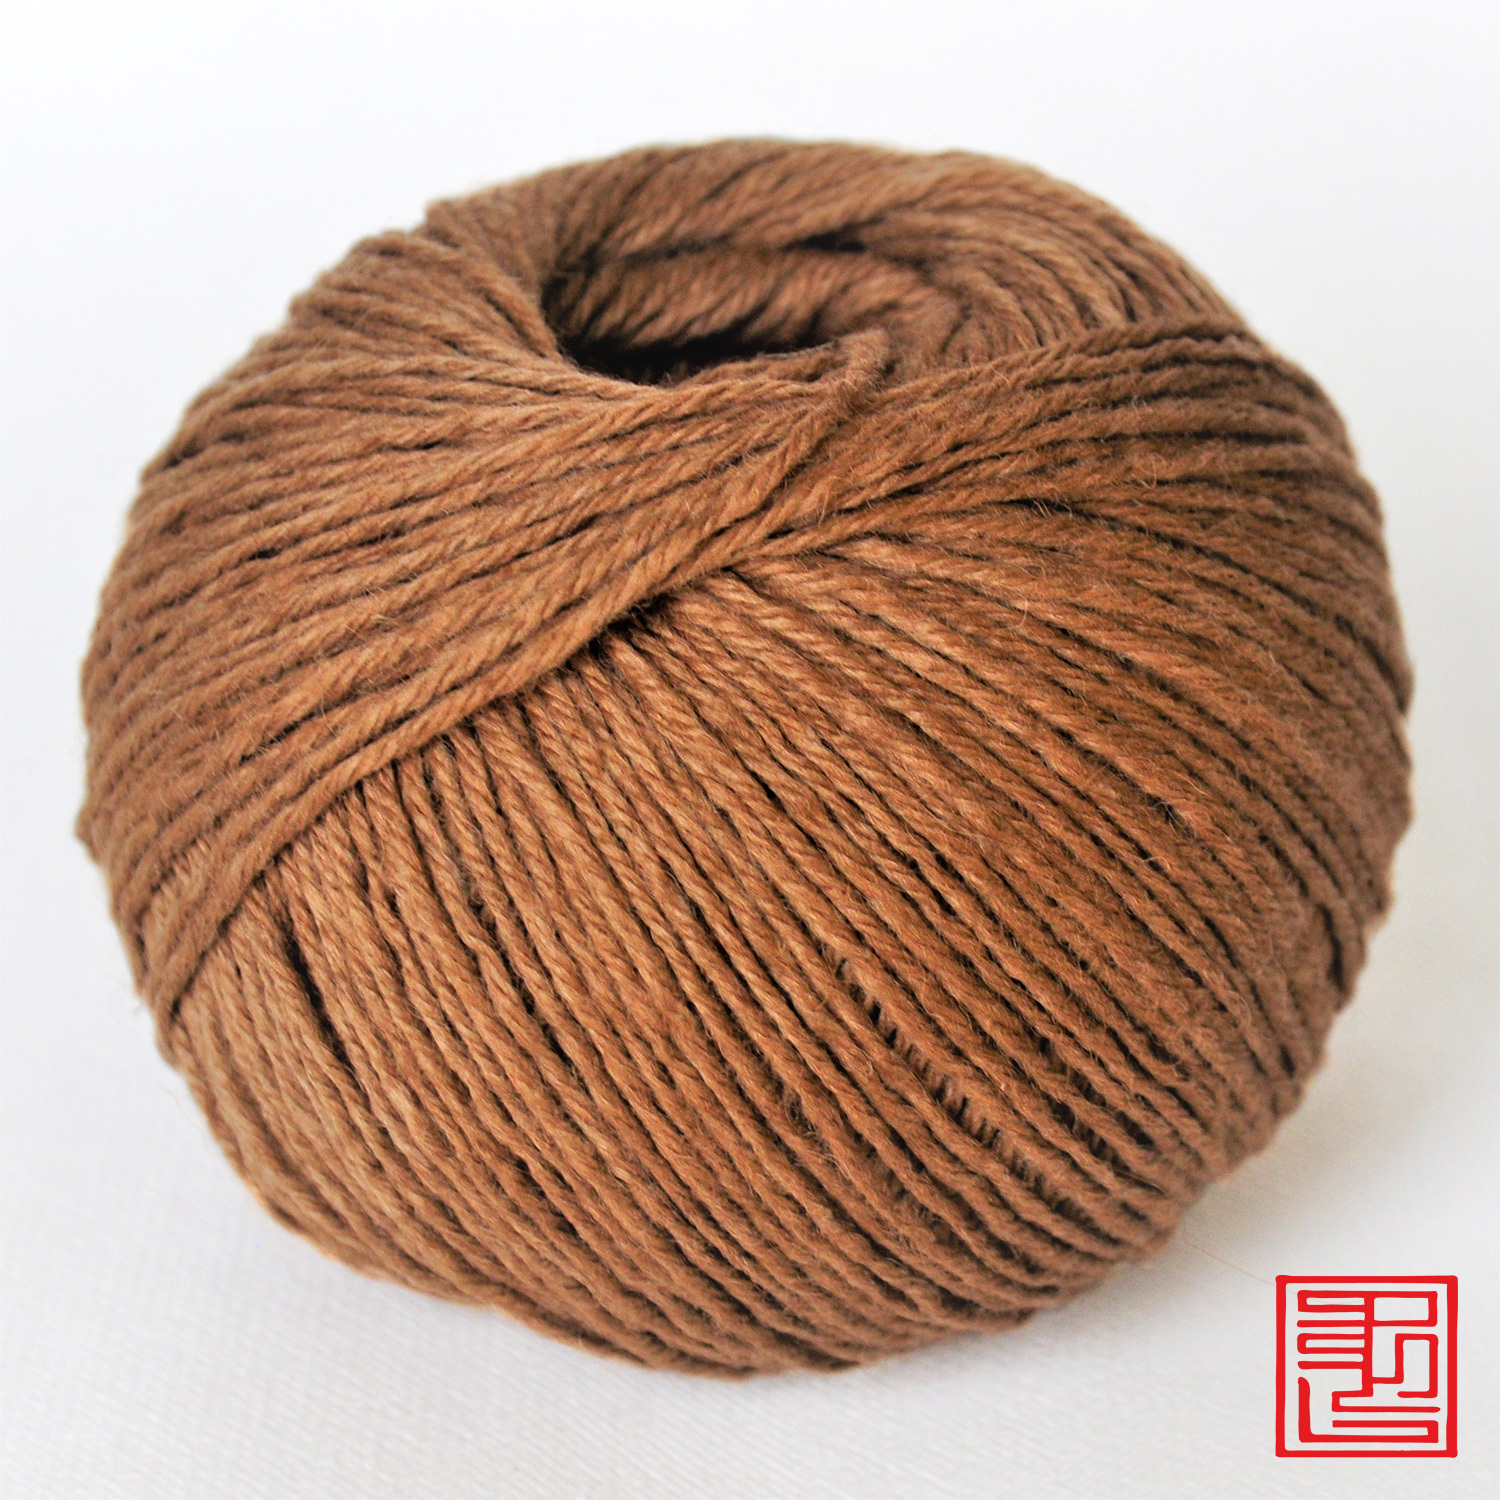 Buy Yarn CAMEL-4 (color Golden Beige), 4-ply, 50g 140m from 100